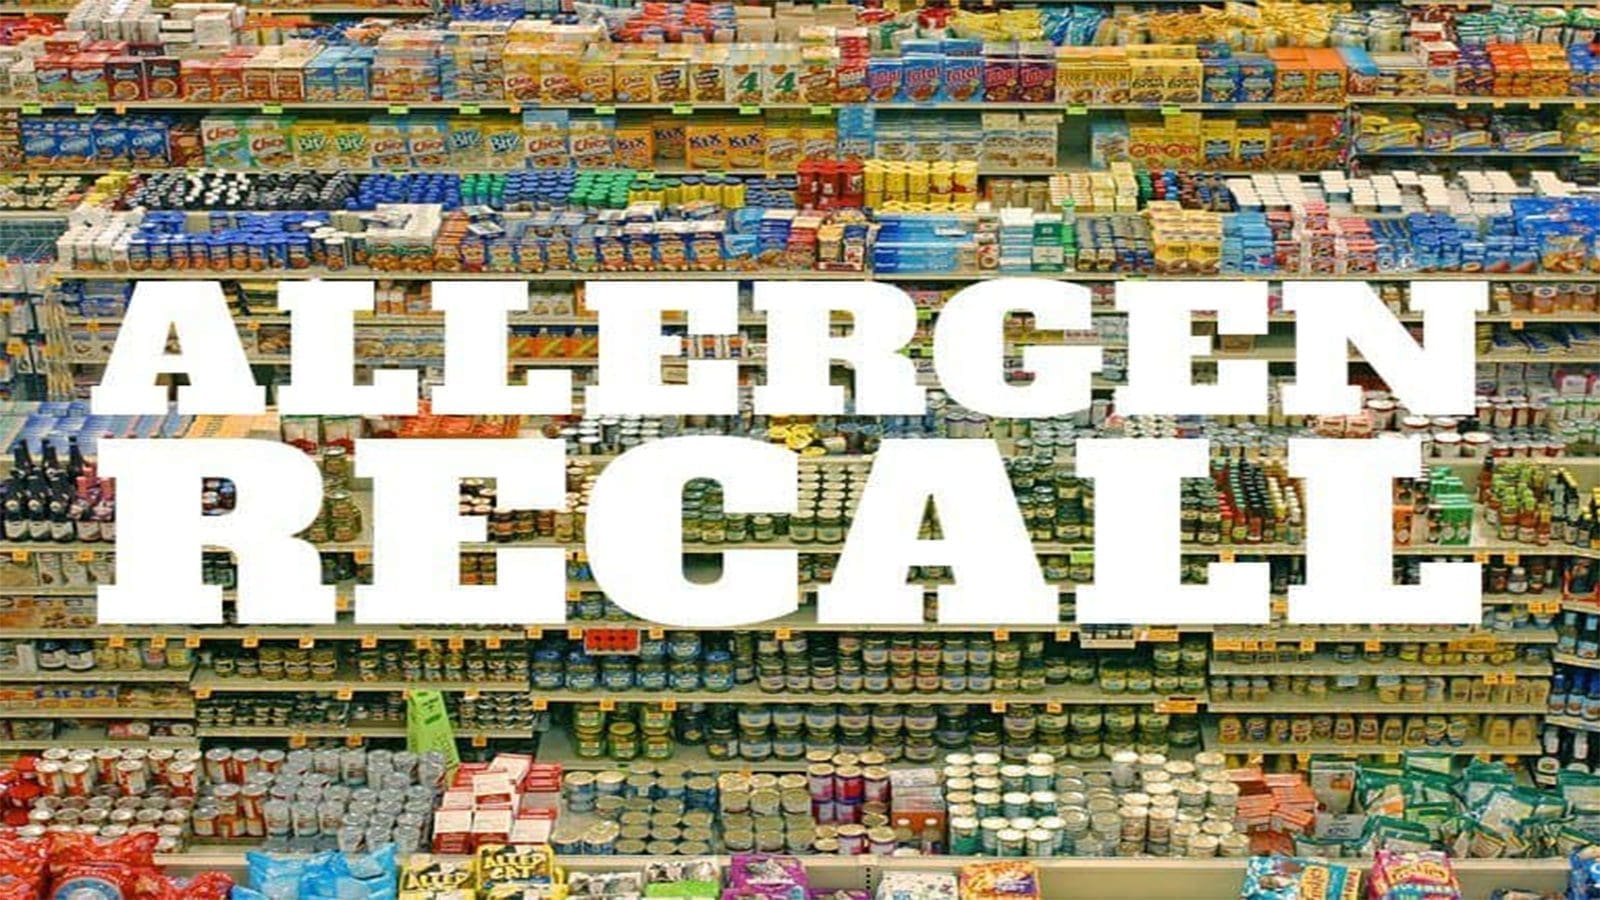 Study shows labeling errors contribute to most allergen recalls